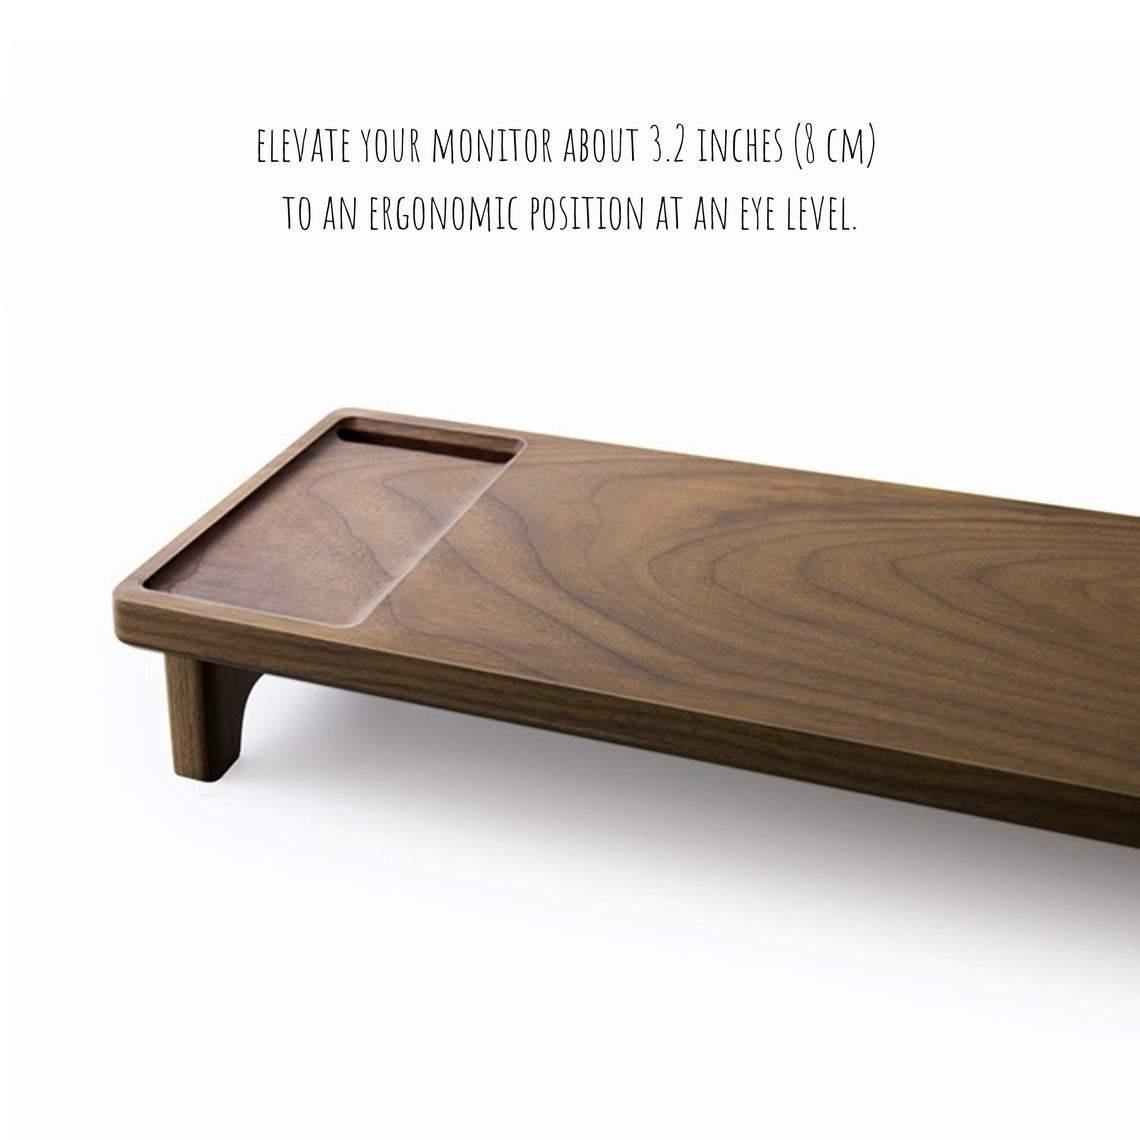  Wooden monitor stand, elevated riser iMac stand, computer display stand, brown solid wood table support table, home office organizer desk